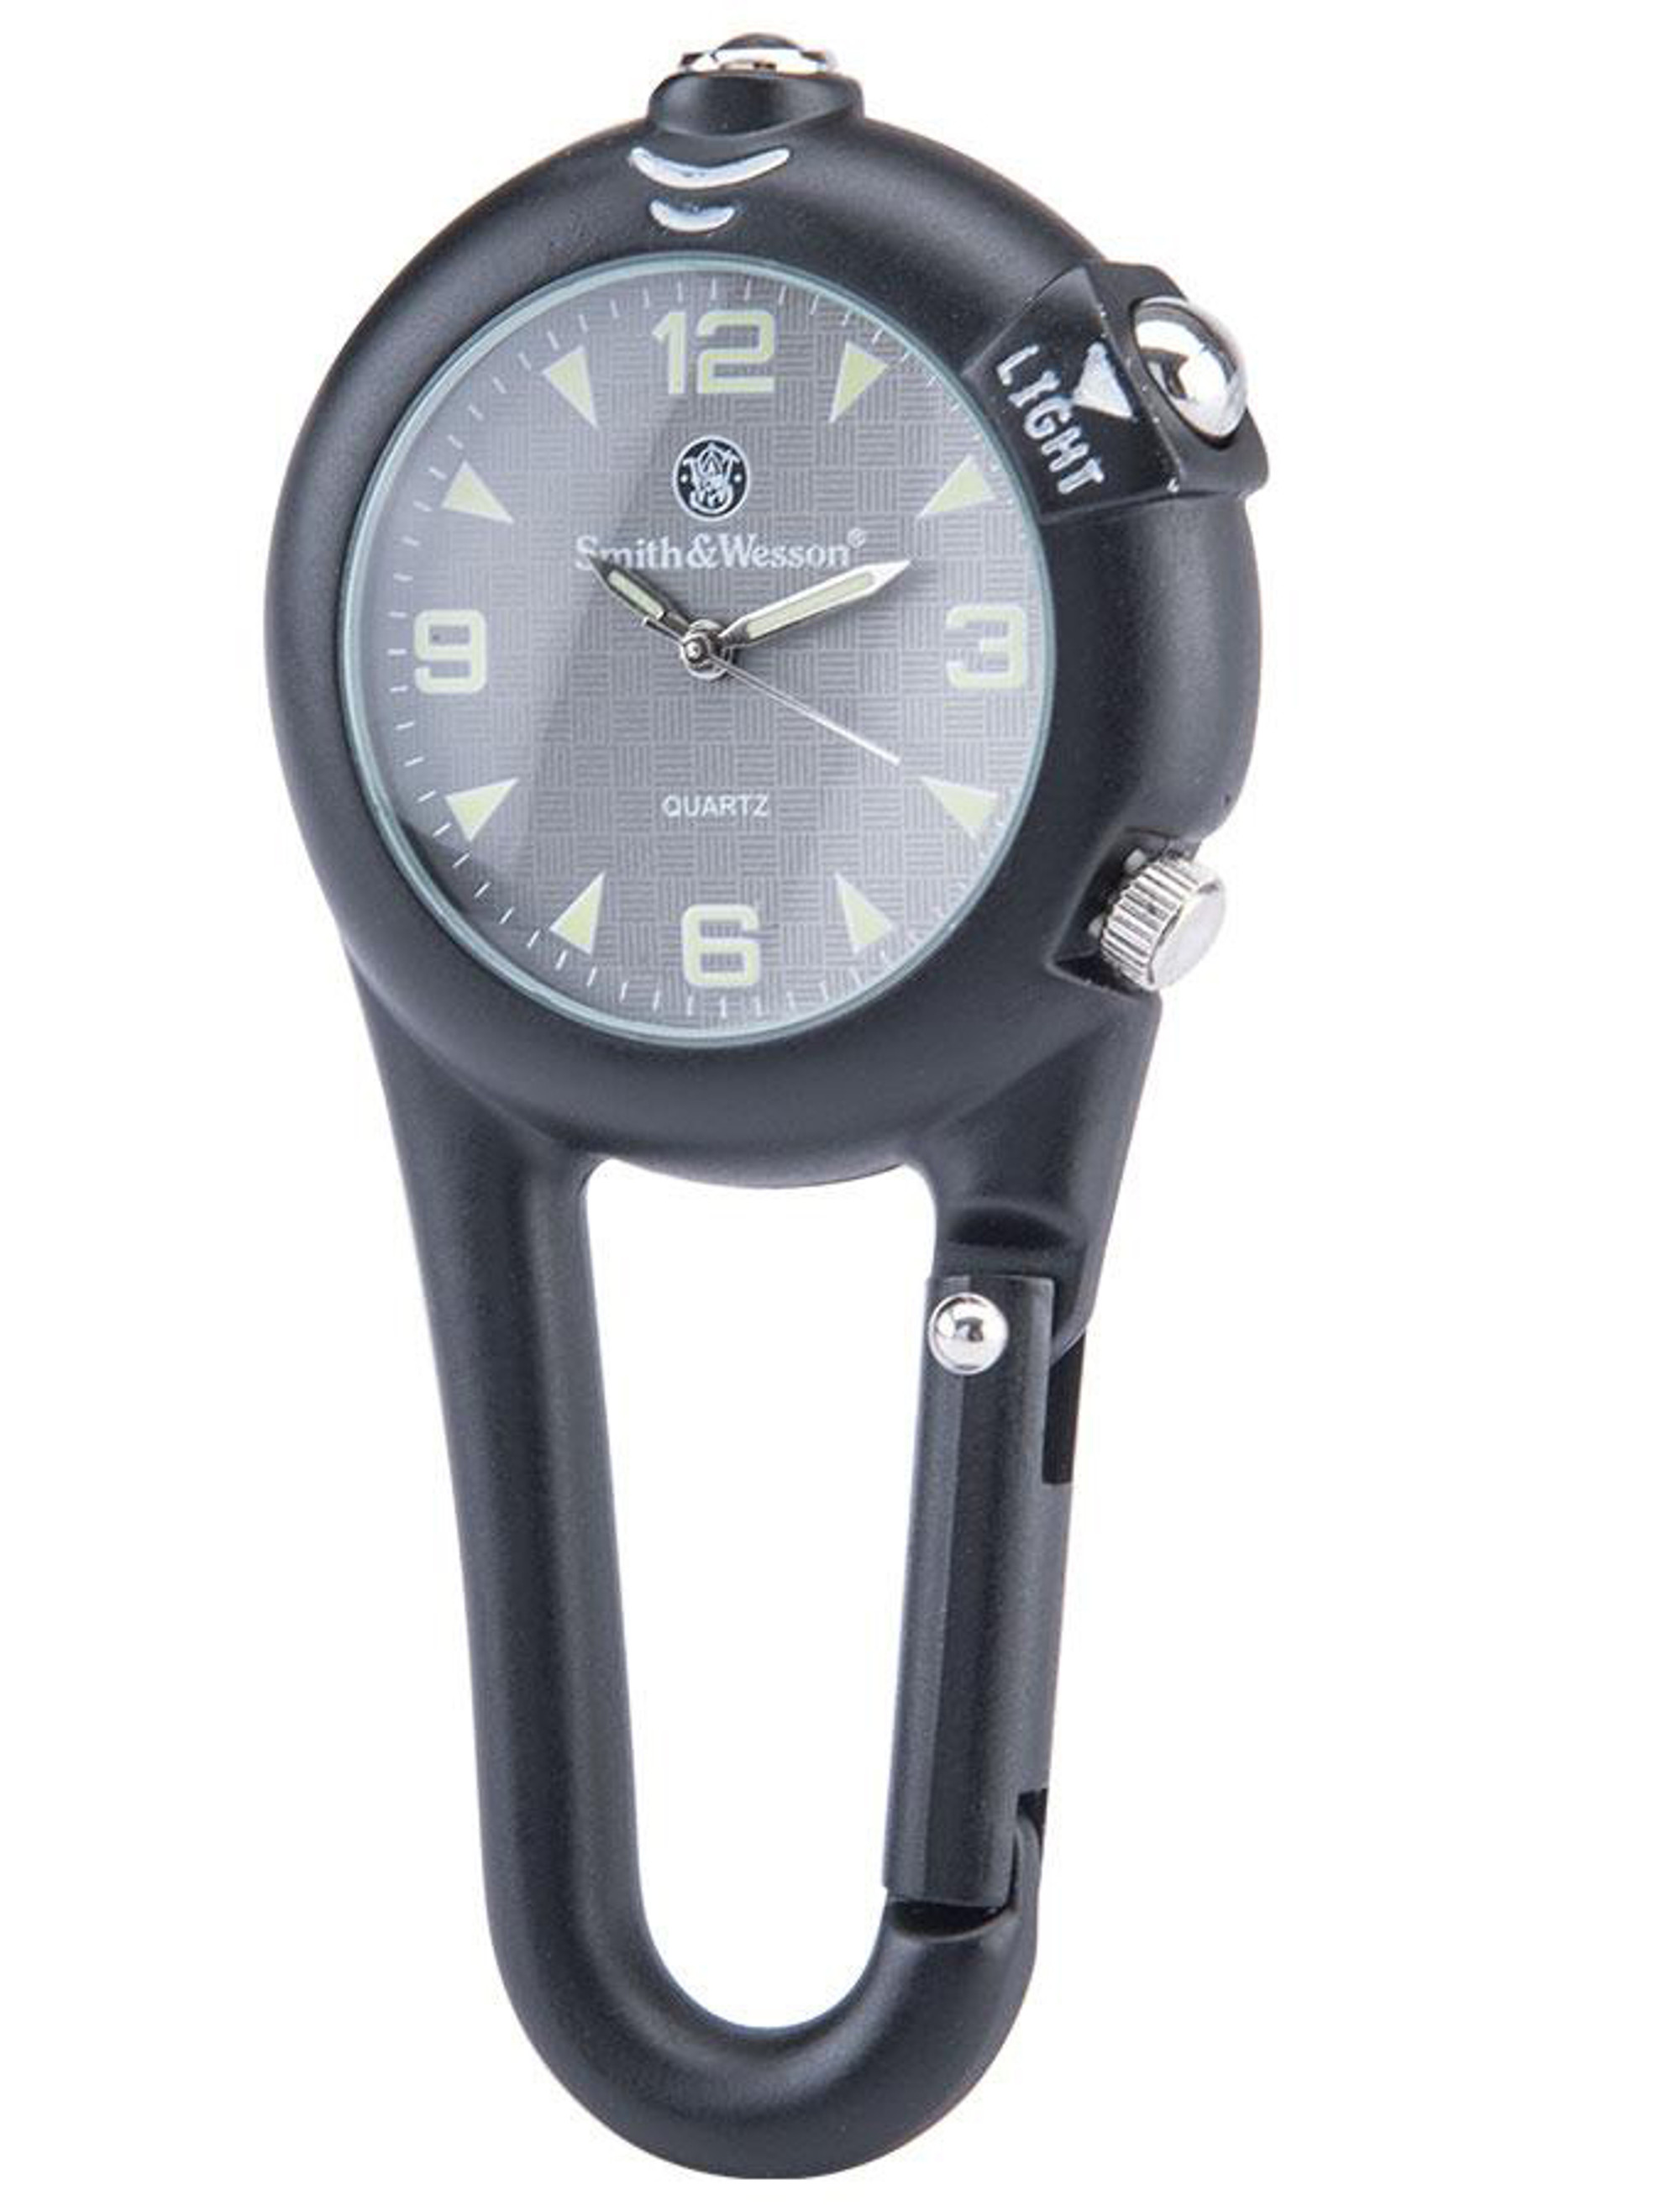 CampCo Smith & Wesson Carabiner Classic Watch w/ LED Light (Color: Black)